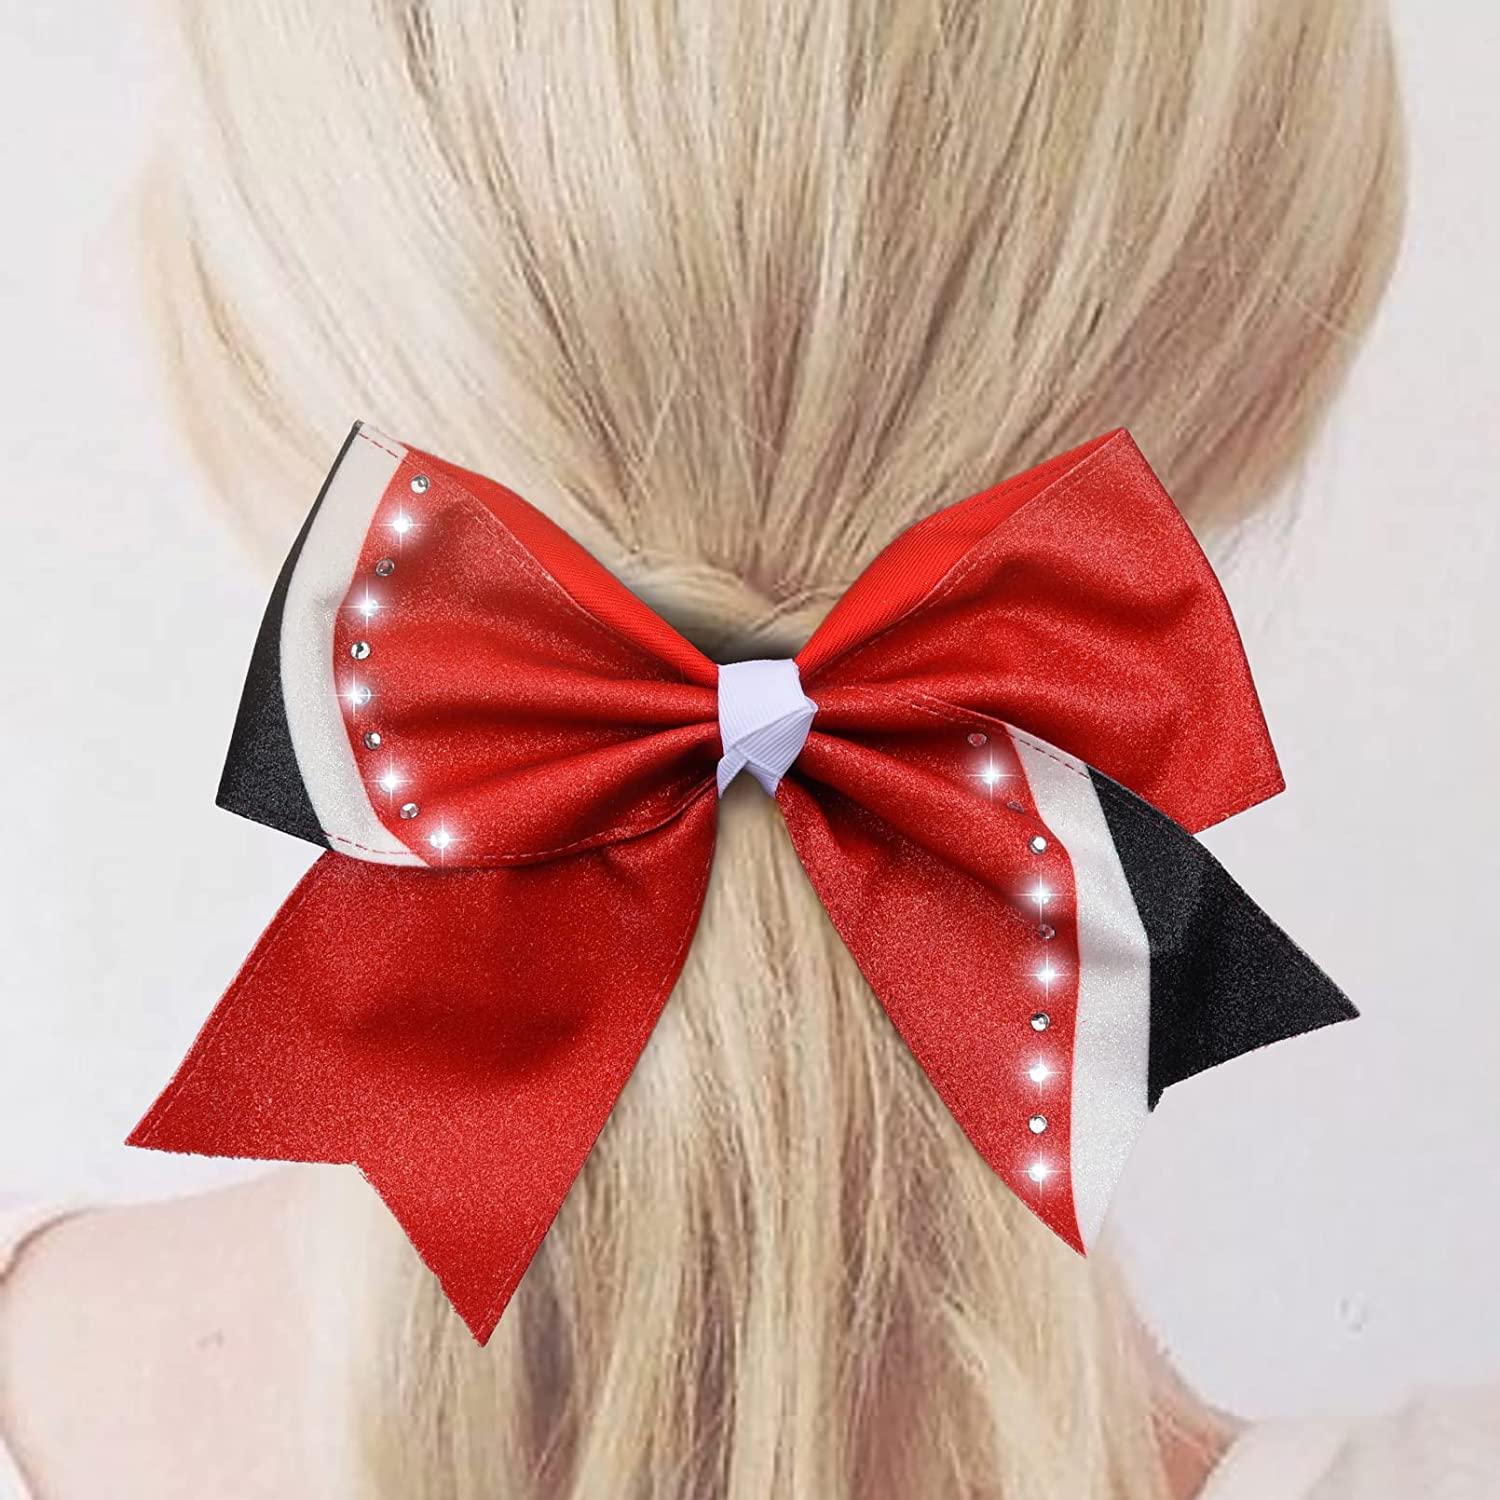 Black Glitter Cheer Bow for Girls Large Hair Bows with Ponytail Holder